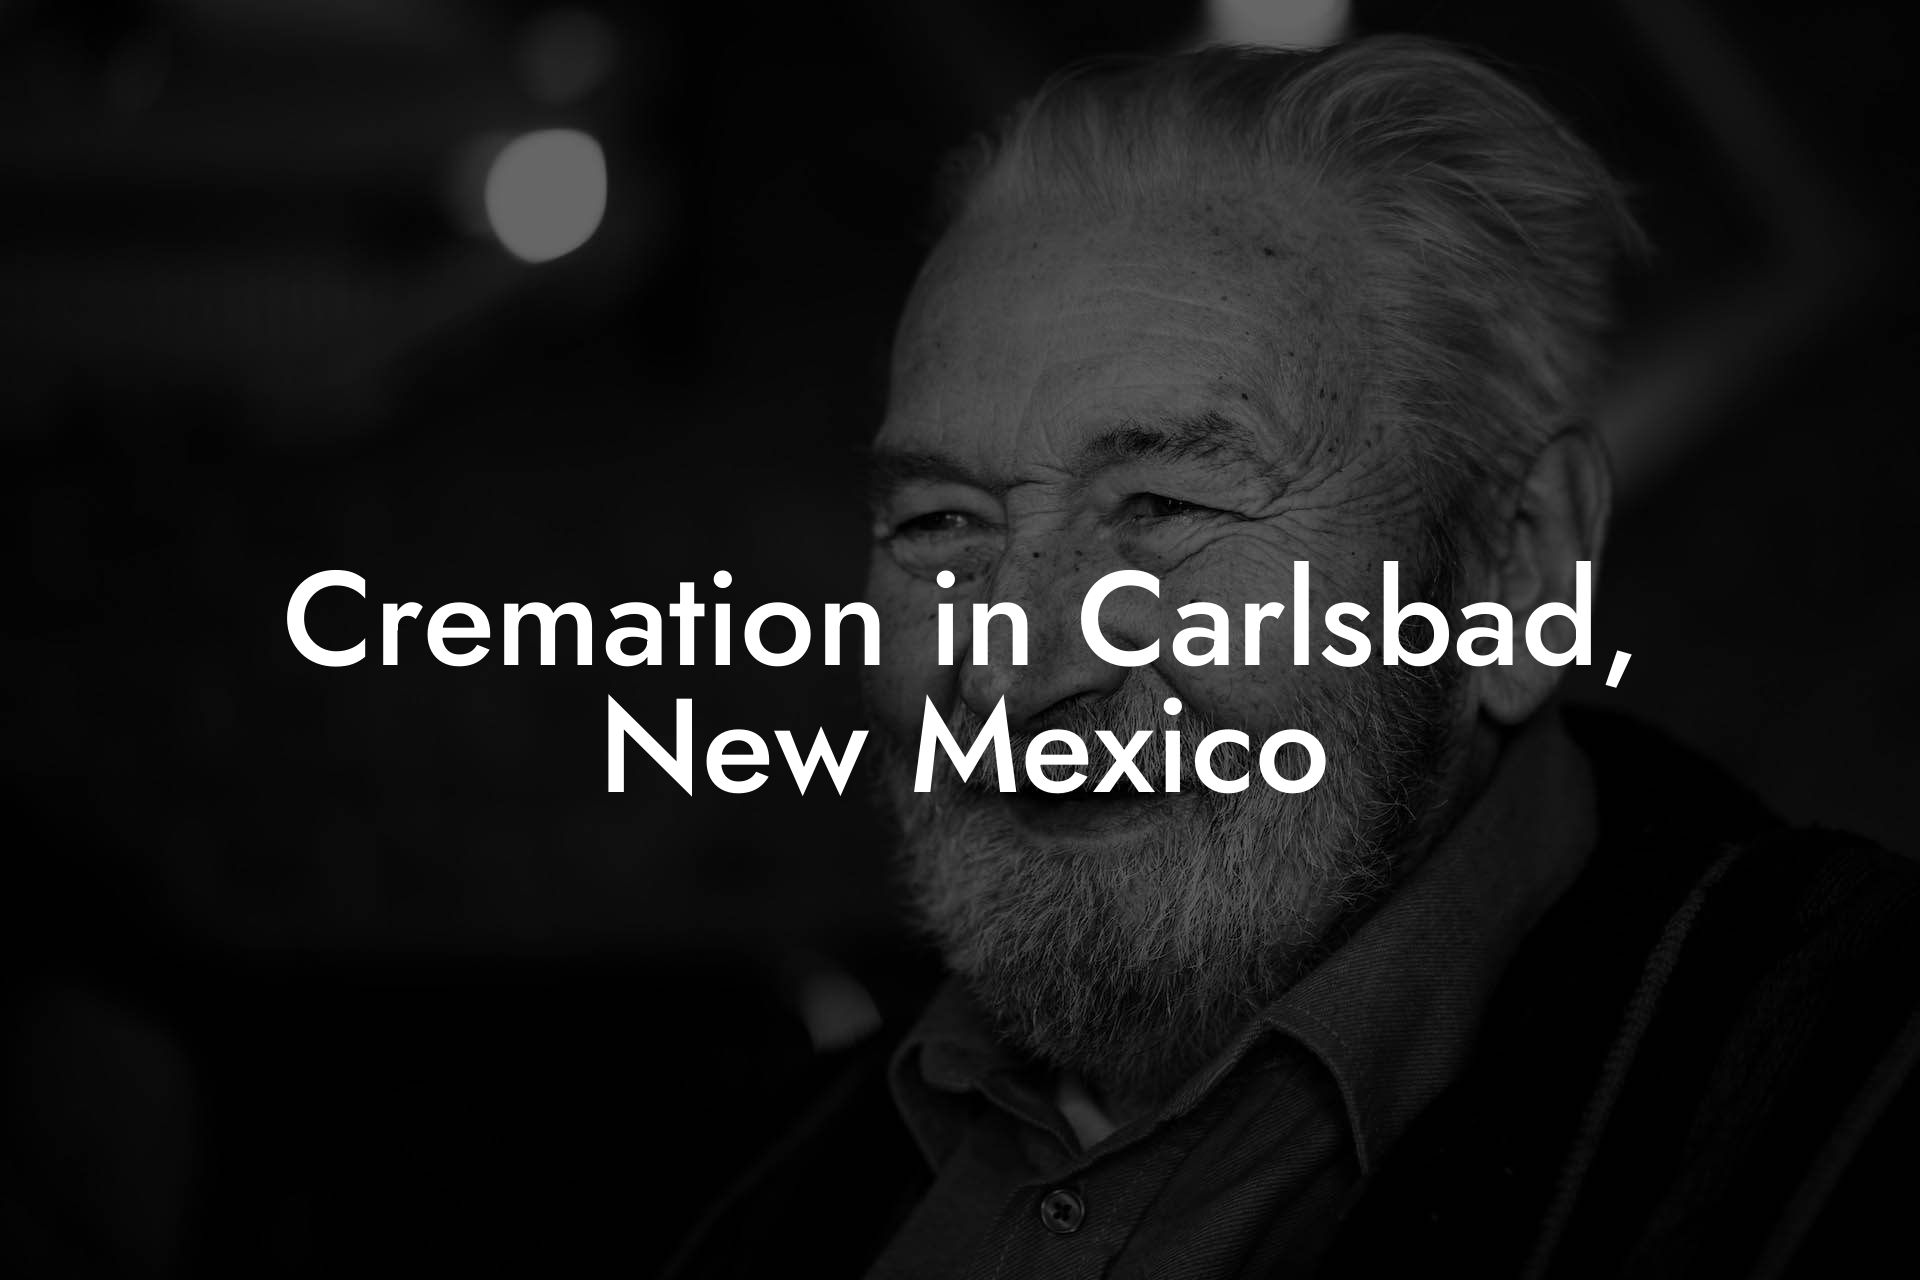 Cremation in Carlsbad, New Mexico